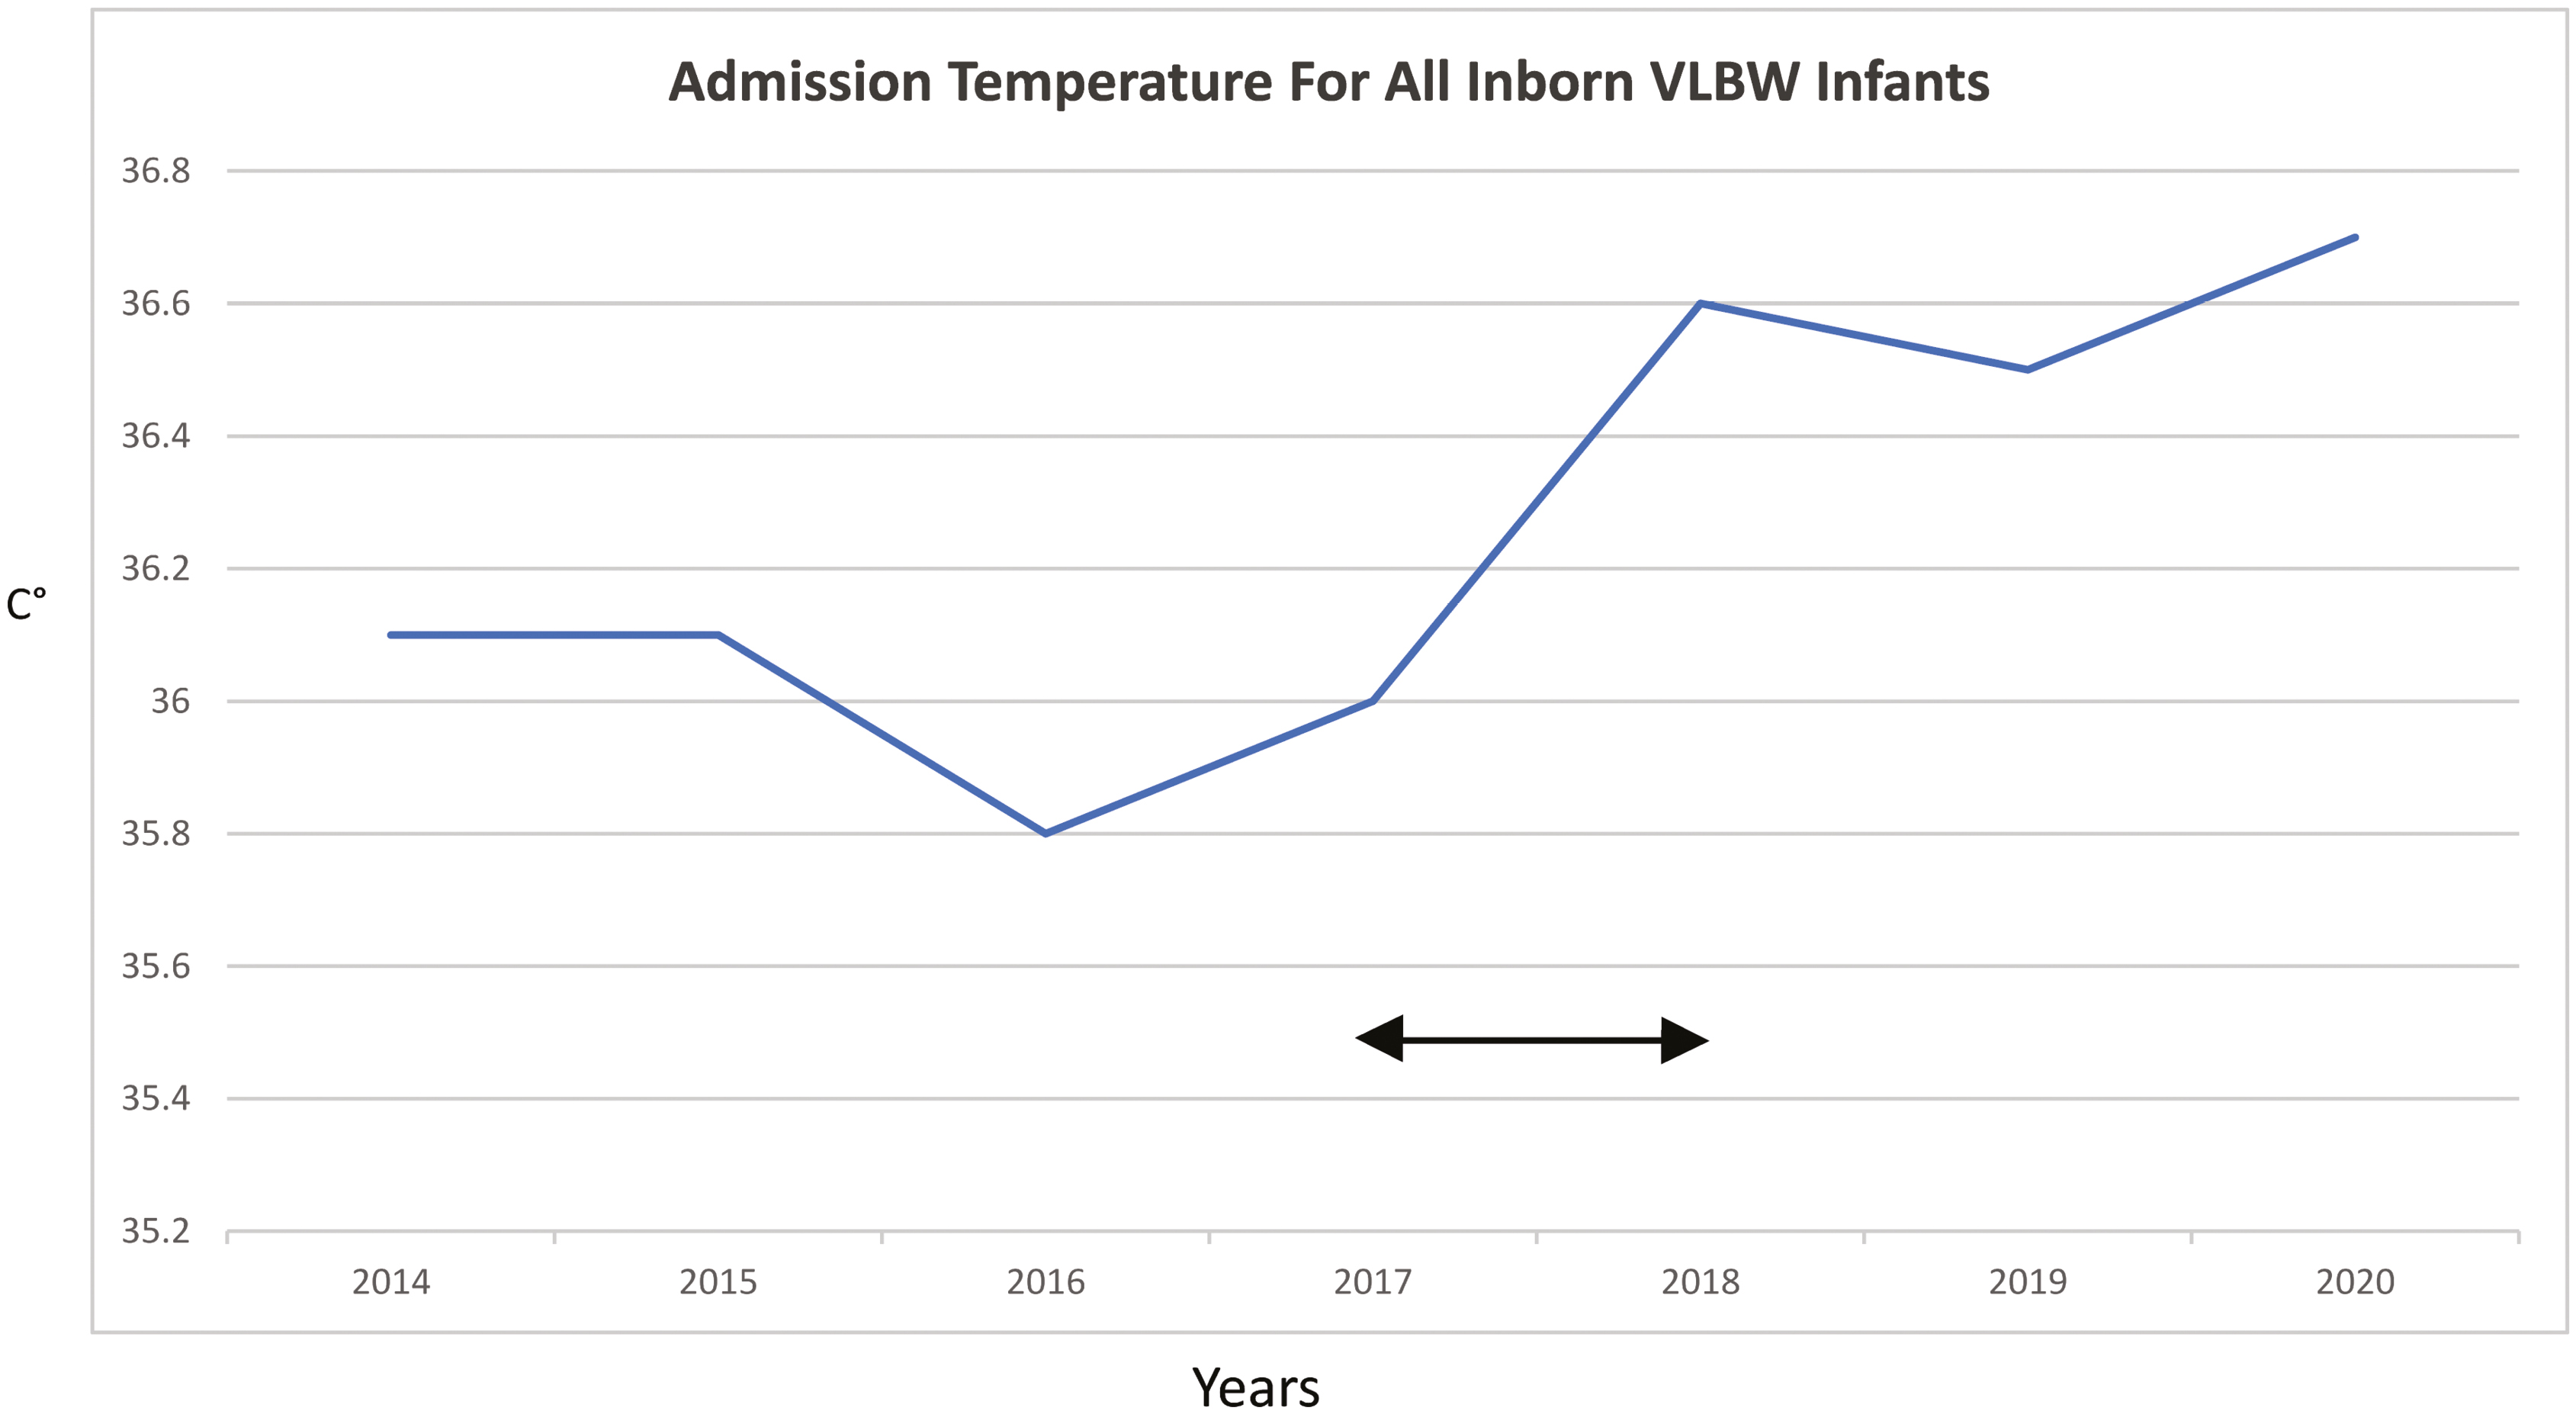 Initial admission temperatures of VLBW infants across time.